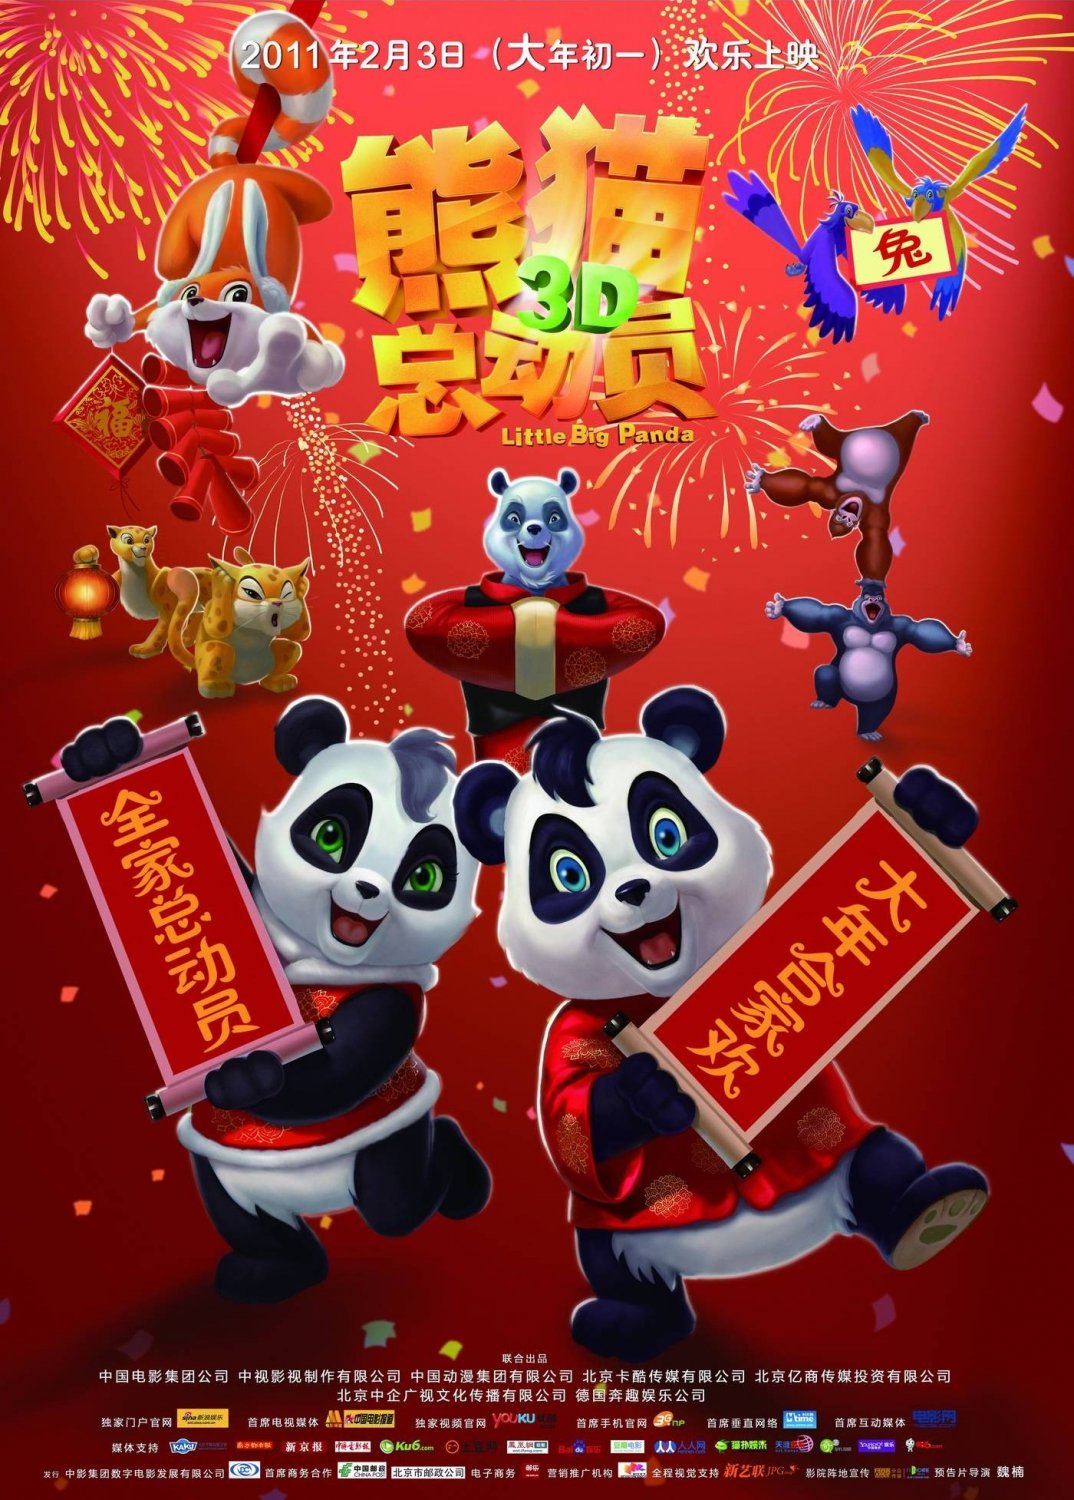 Extra Large Movie Poster Image for Little Big Panda (#3 of 8)